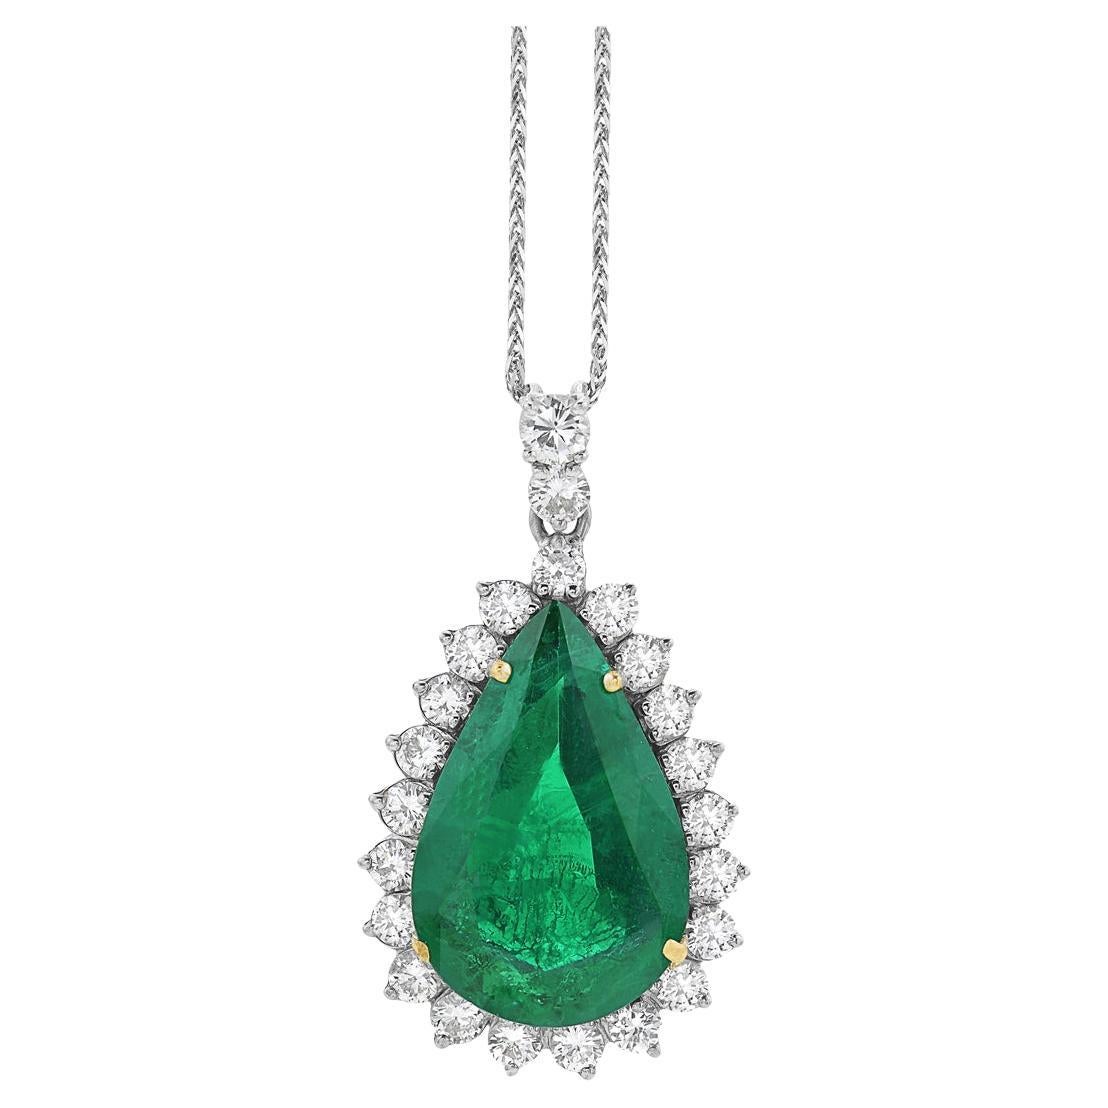 15 Ct Pear Hydro Emerald & 4 Ct Diamond Pendent/Necklace 18 Kt White Gold